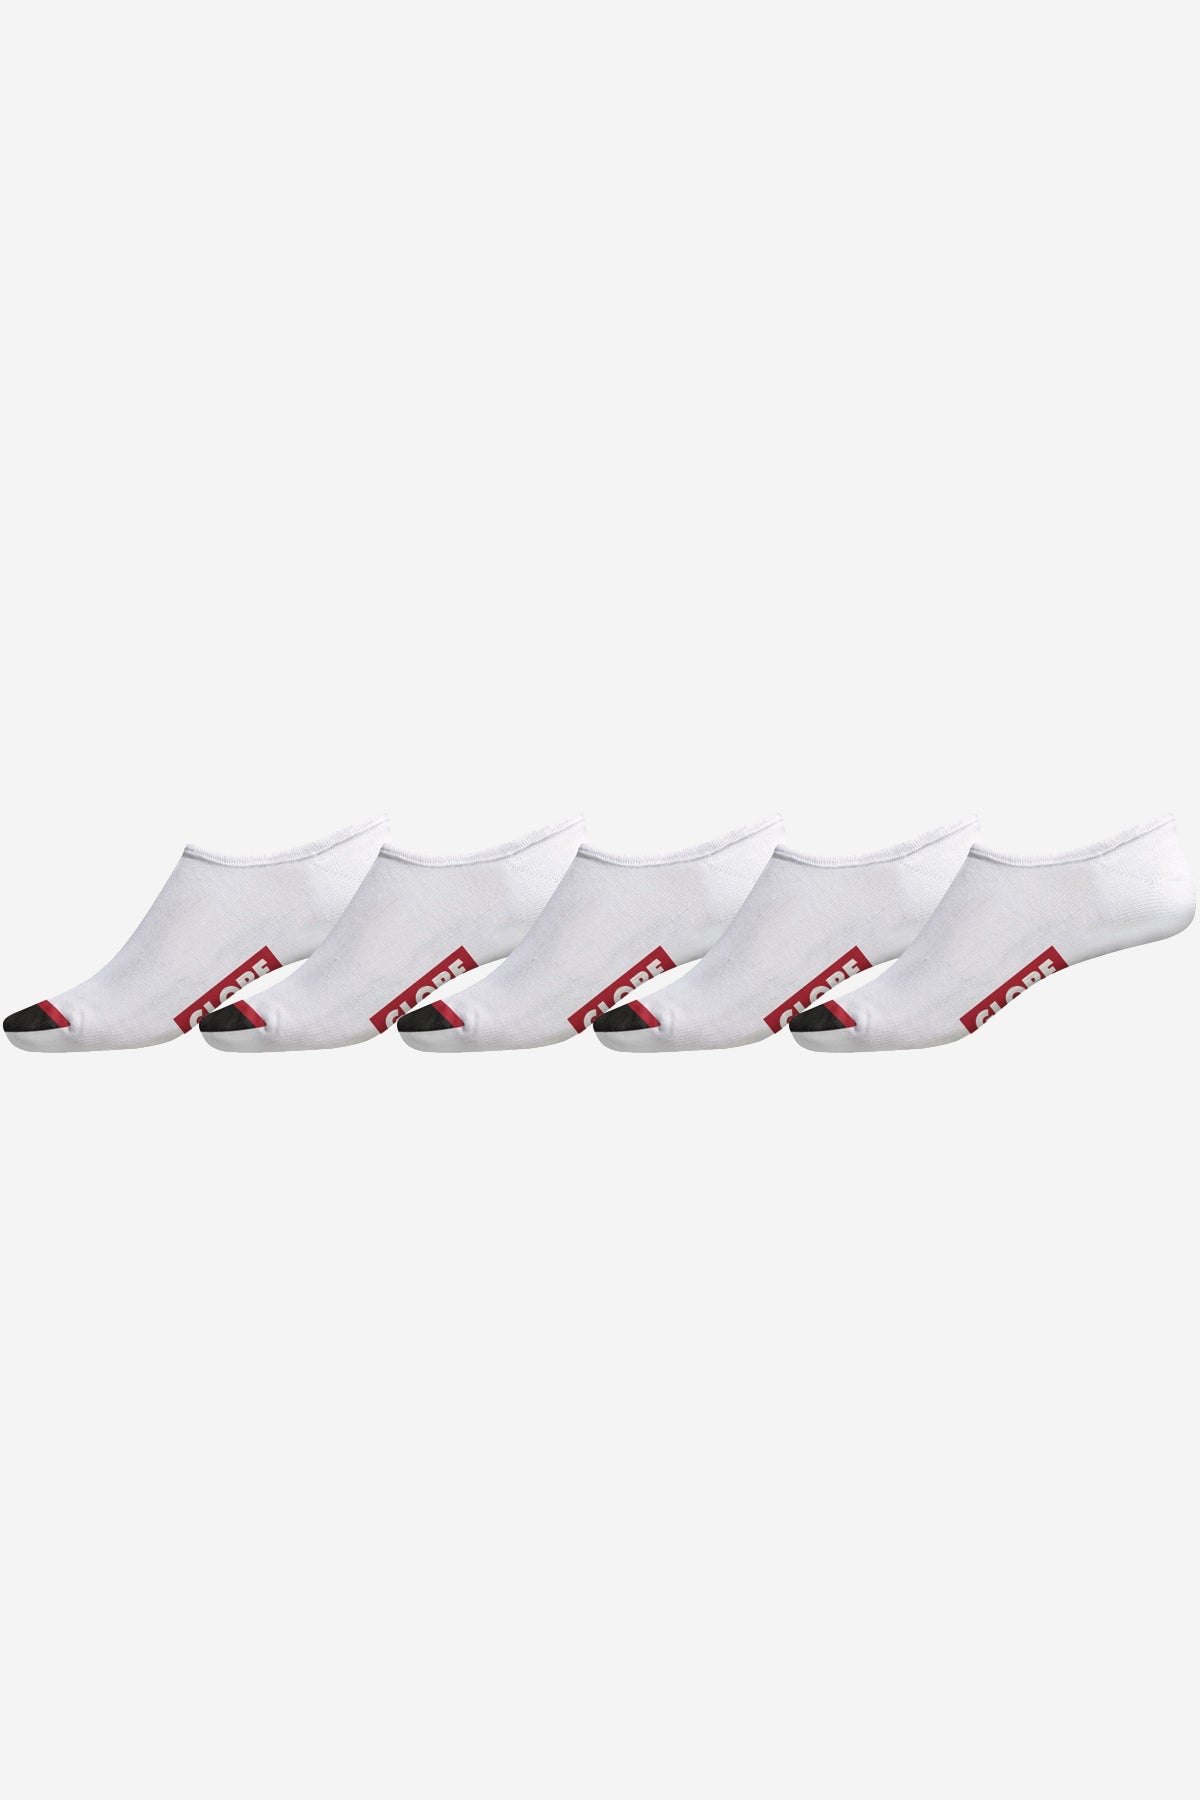 Tipper Invisible Sock 5 Pack - White